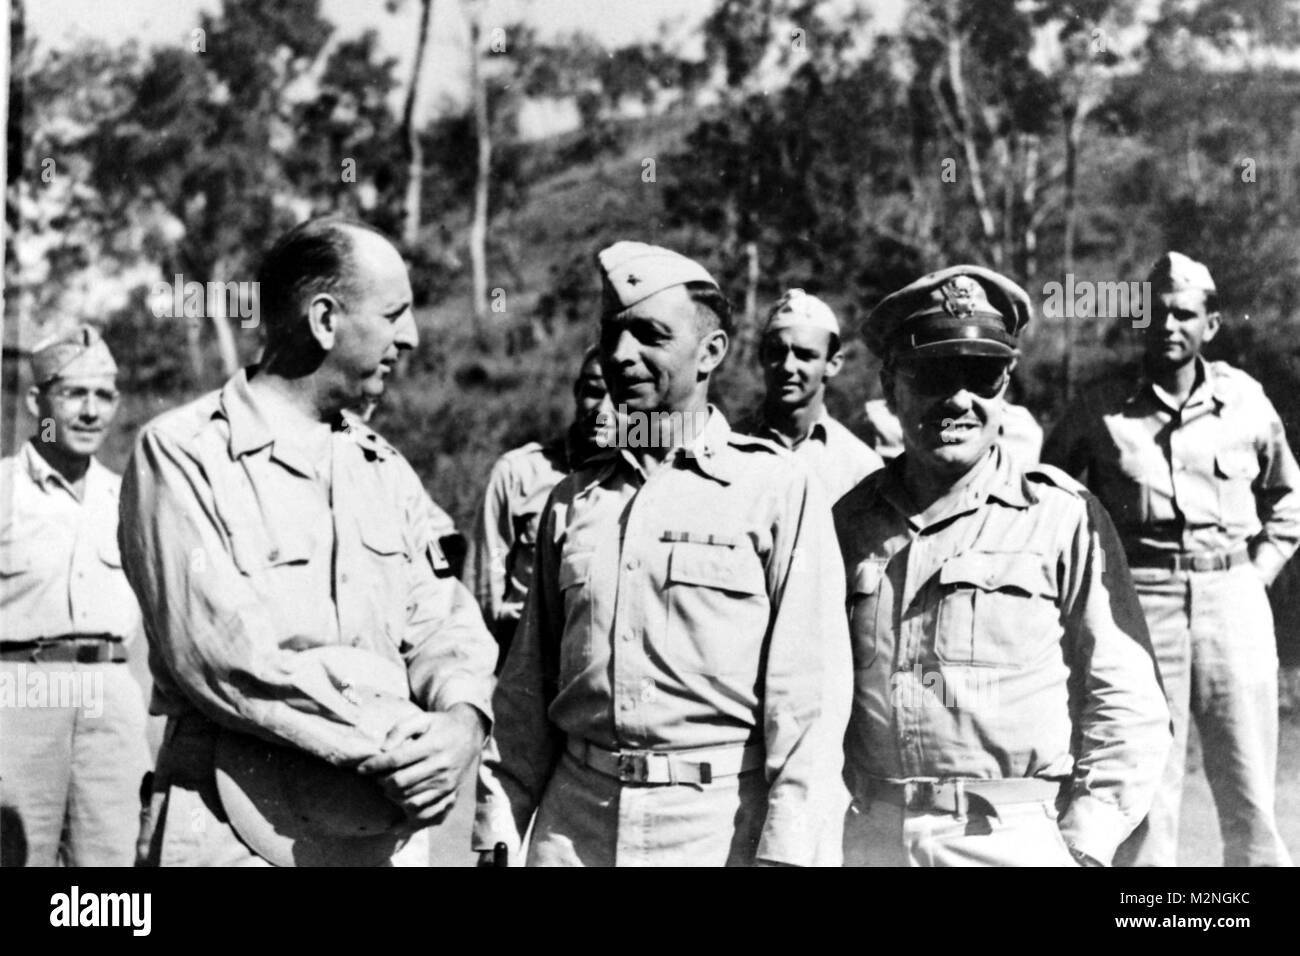 PORT MORESBY, New Guinea, September 10, 1943 – Senator Richard Russell of Georgia with members of the 101st AAA Separate Battalion during his tour of inspection. Photo 231964, National Archives Records Administration (NARA), College Park, Md. 101st AAA in New Guinea by Georgia National Guard Stock Photo